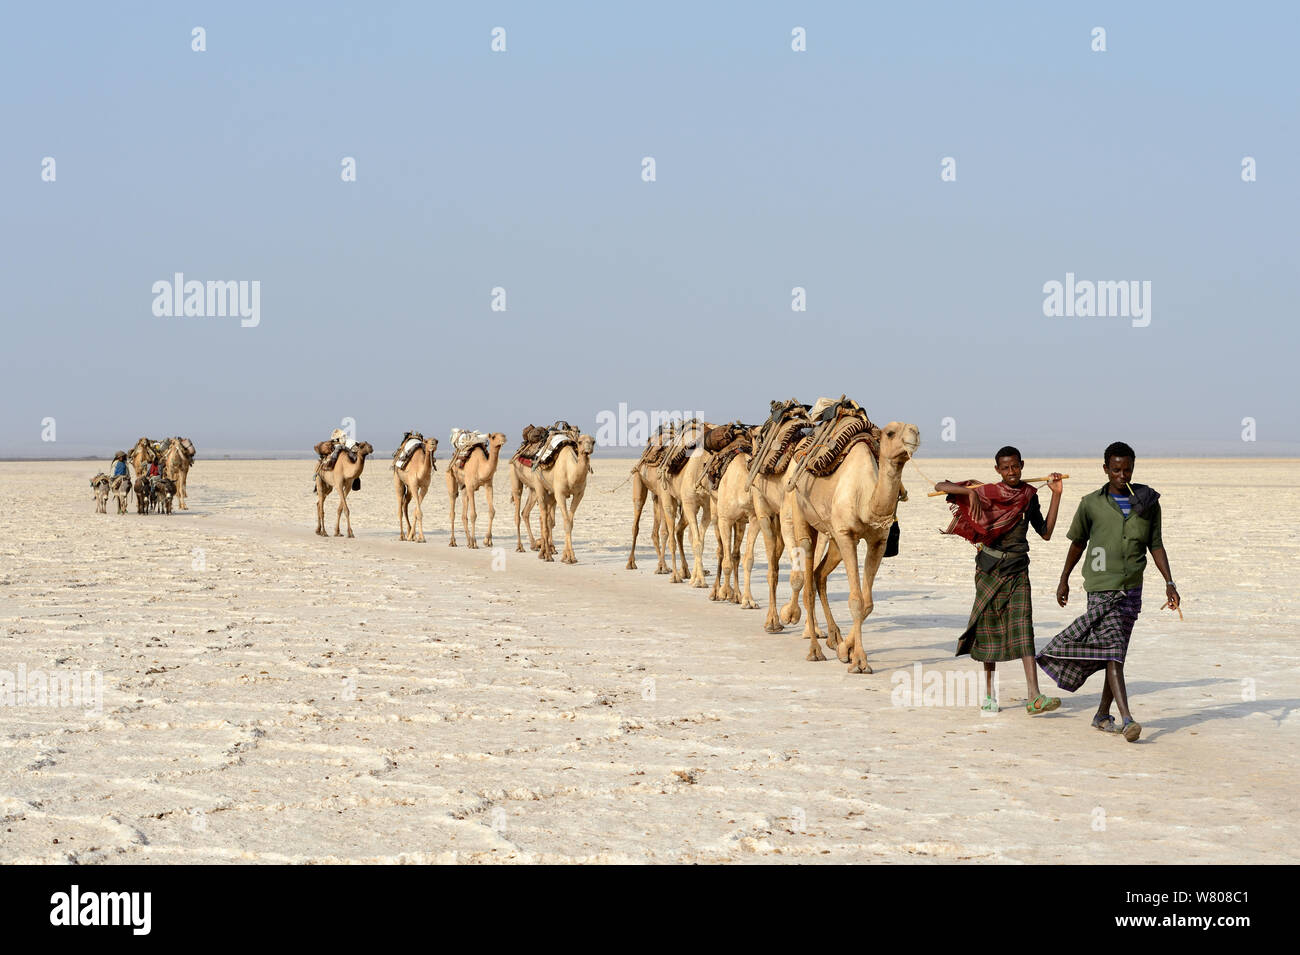 Salt caravans made up of hundreds of Dromedary camels (Camelus dromedarius) and their pullers transporting salt slabs cut from the salt lake Assale to the Mekele market, Danakil depression, Afar region, Ethiopia, March 2015. Stock Photo